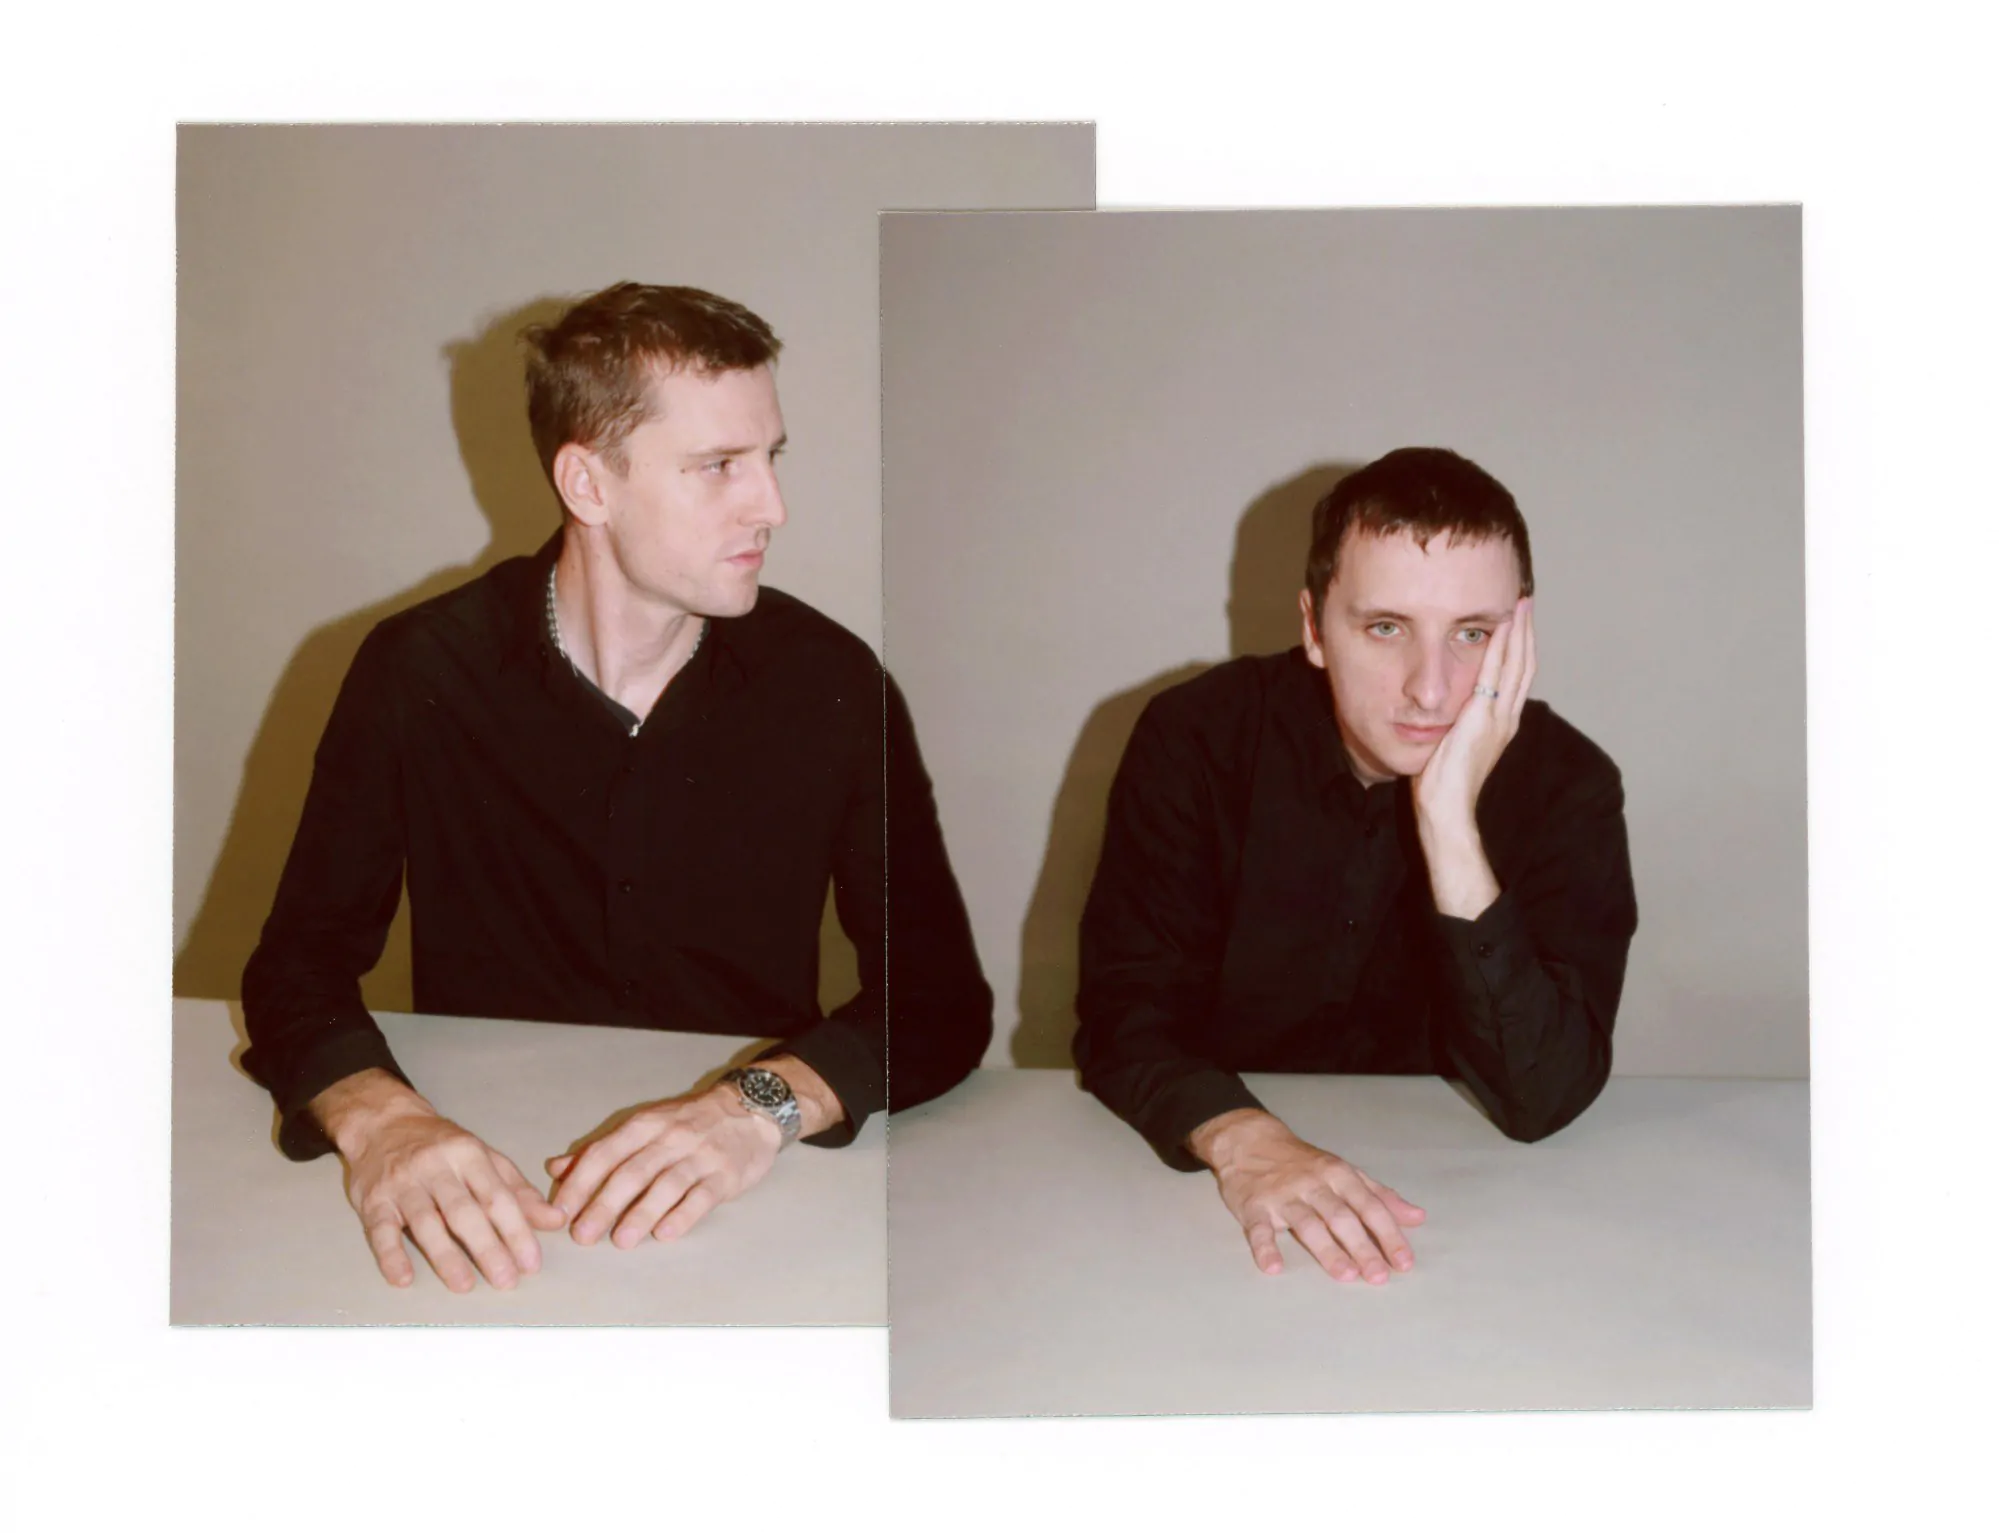 THESE NEW PURITANS announce Hidden [MMXX], 10-year anniversary re-issue